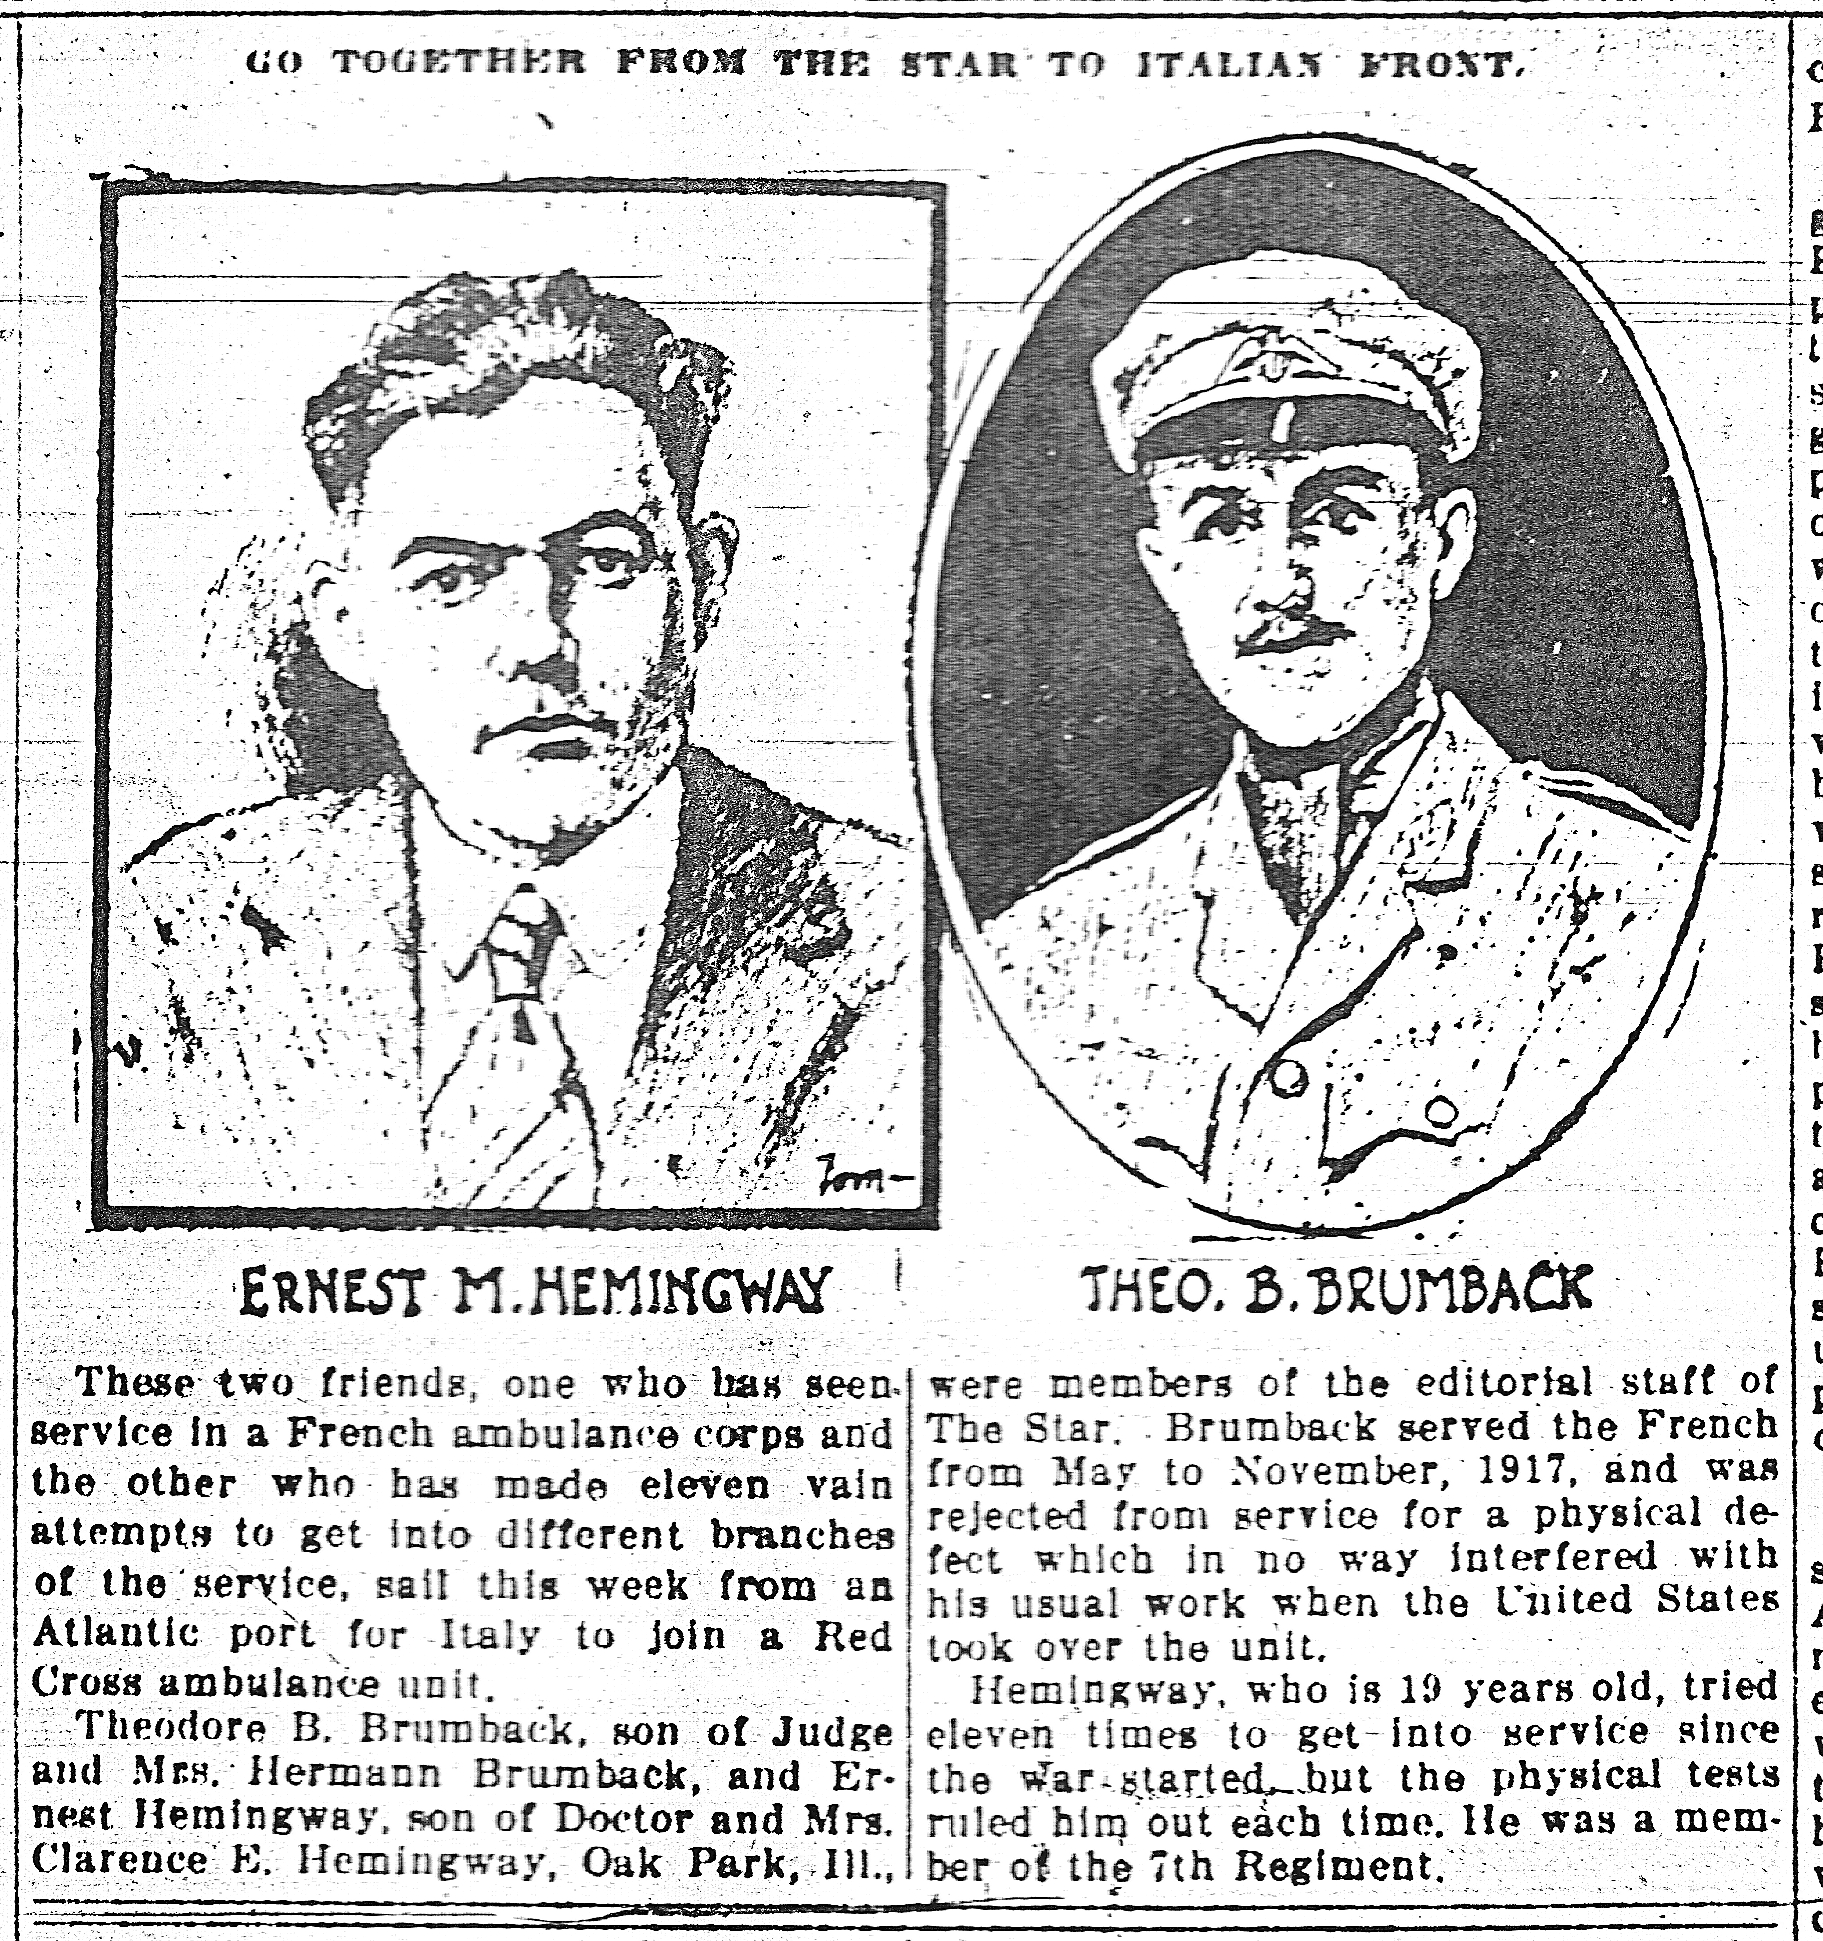 A scanned image of a newspaper article showing portrait images of two men, both reporters for the newspaper.  Ernest M. Hemingway is shown in suit and tie; Theo B. Brumback is shown in uniform.